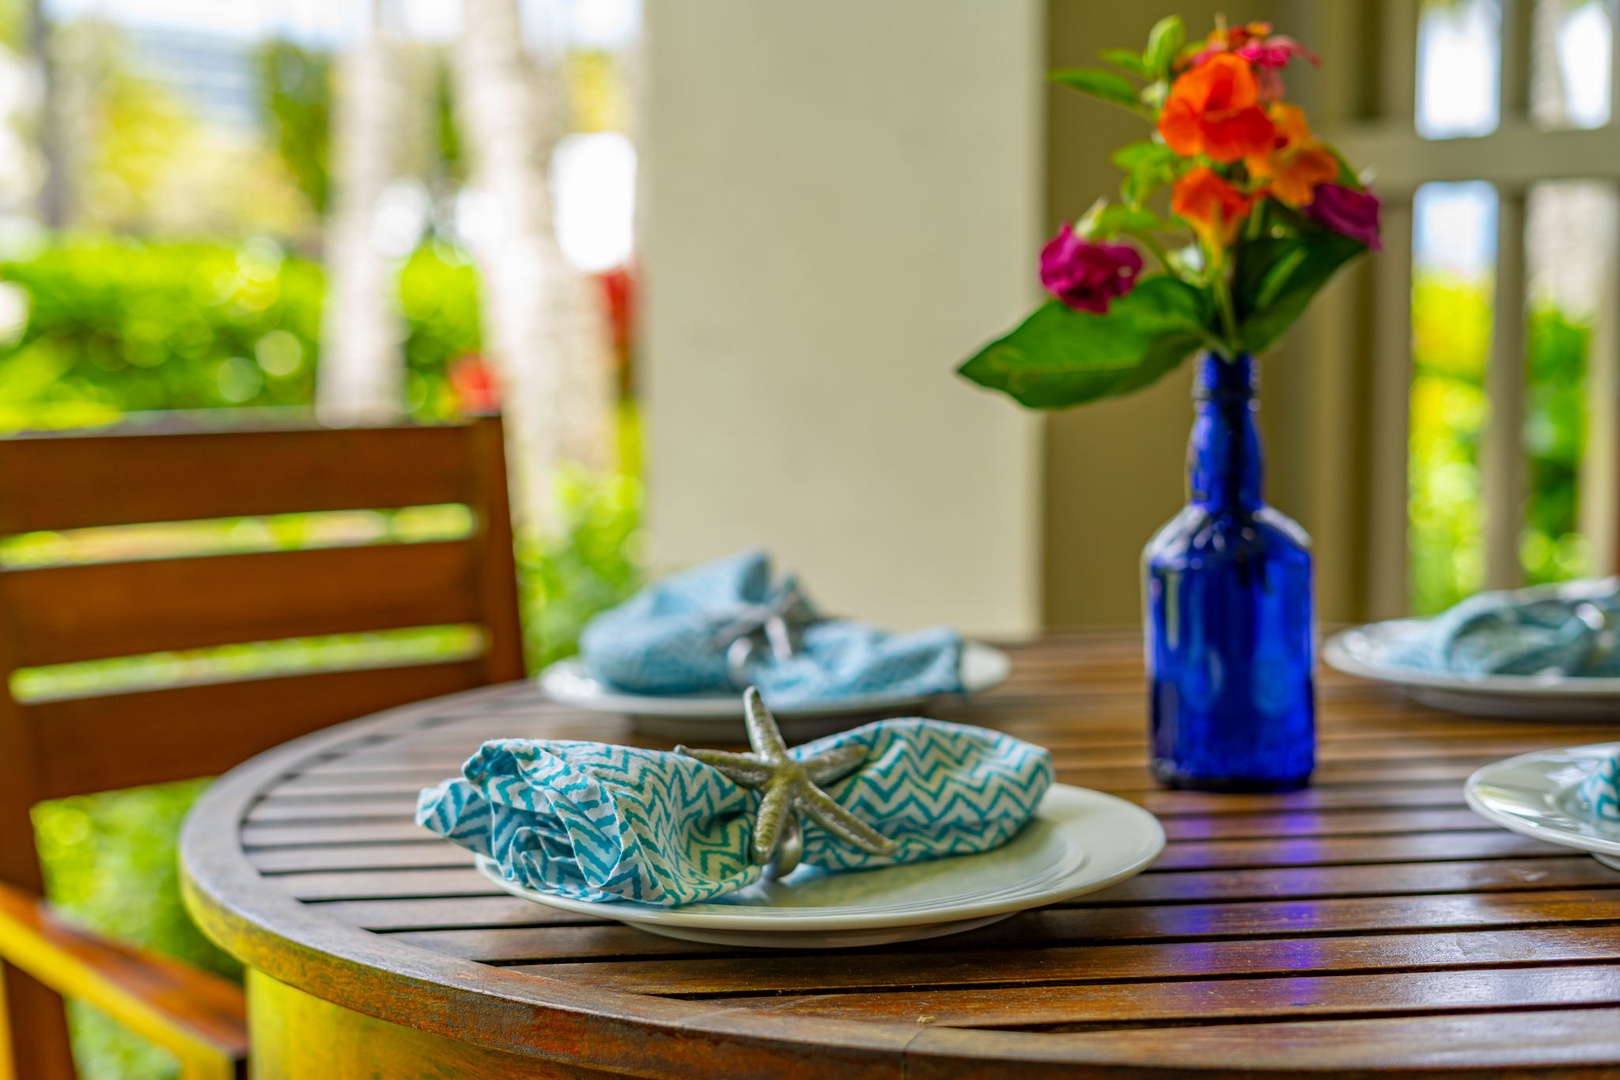 Kahuku Vacation Rentals, Turtle Bay Villas 114 - Outdoor dining experience at Turtle Bay 114